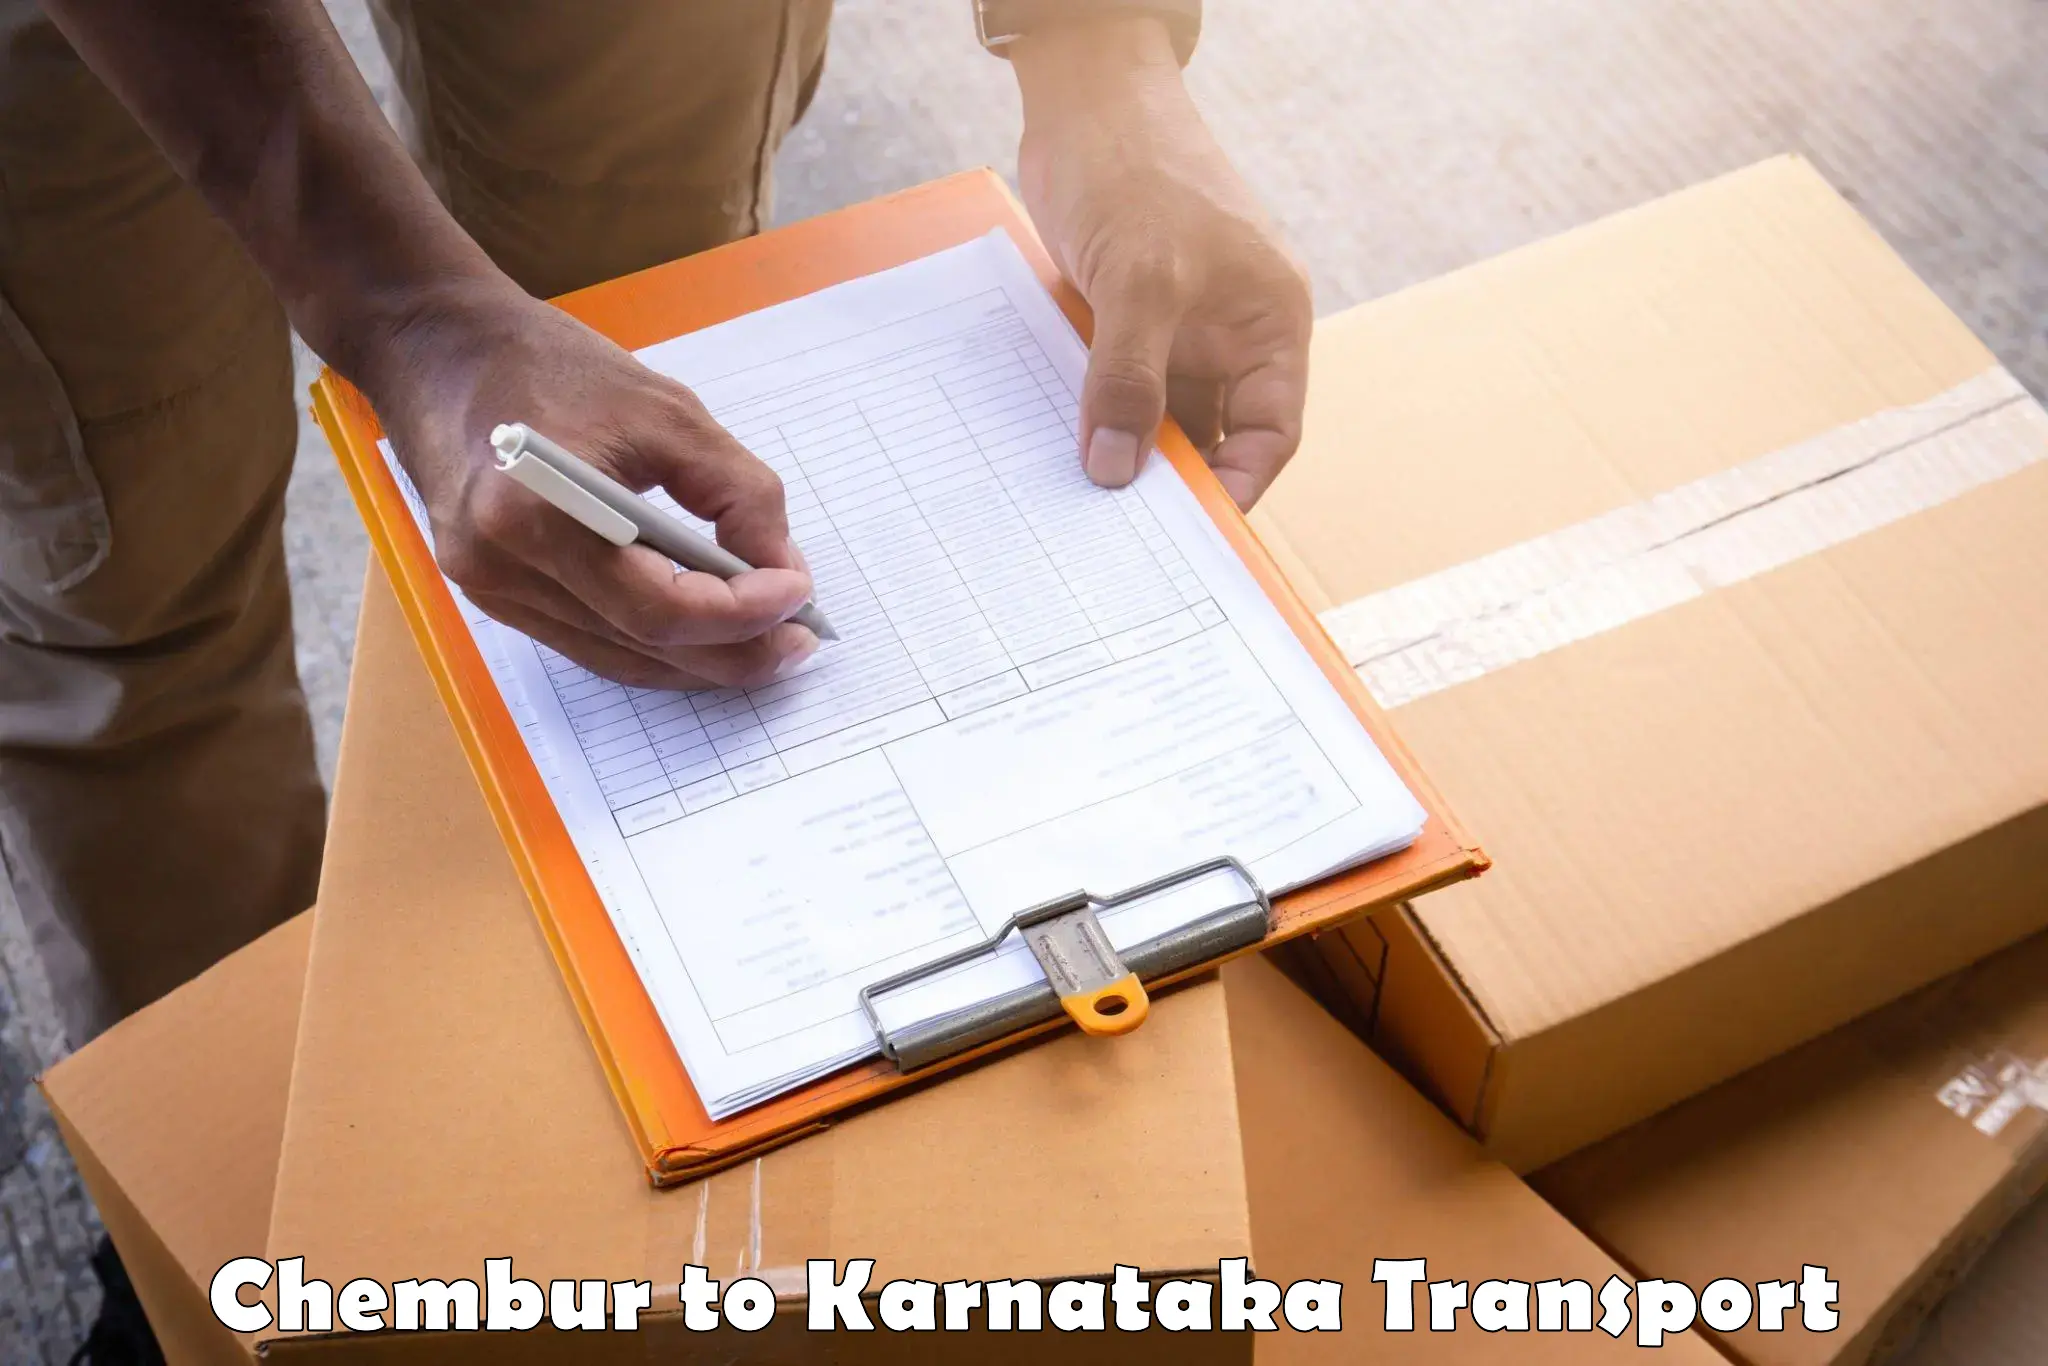 Pick up transport service Chembur to Dharwad